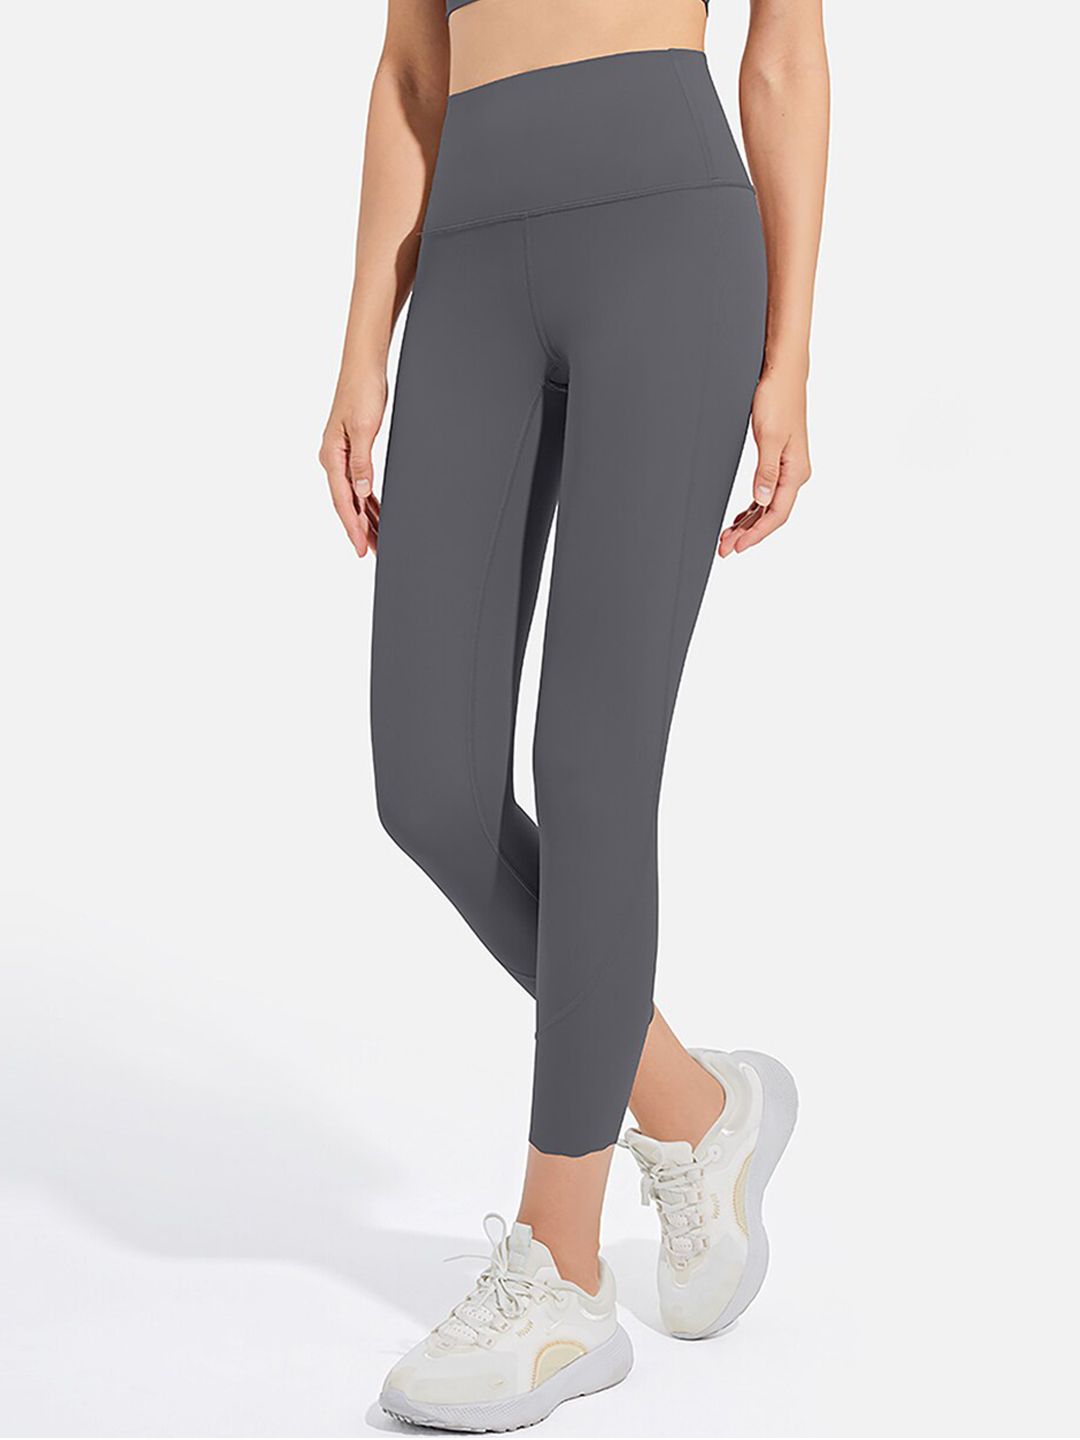 JC Collection Women Grey Solid Tights Price in India